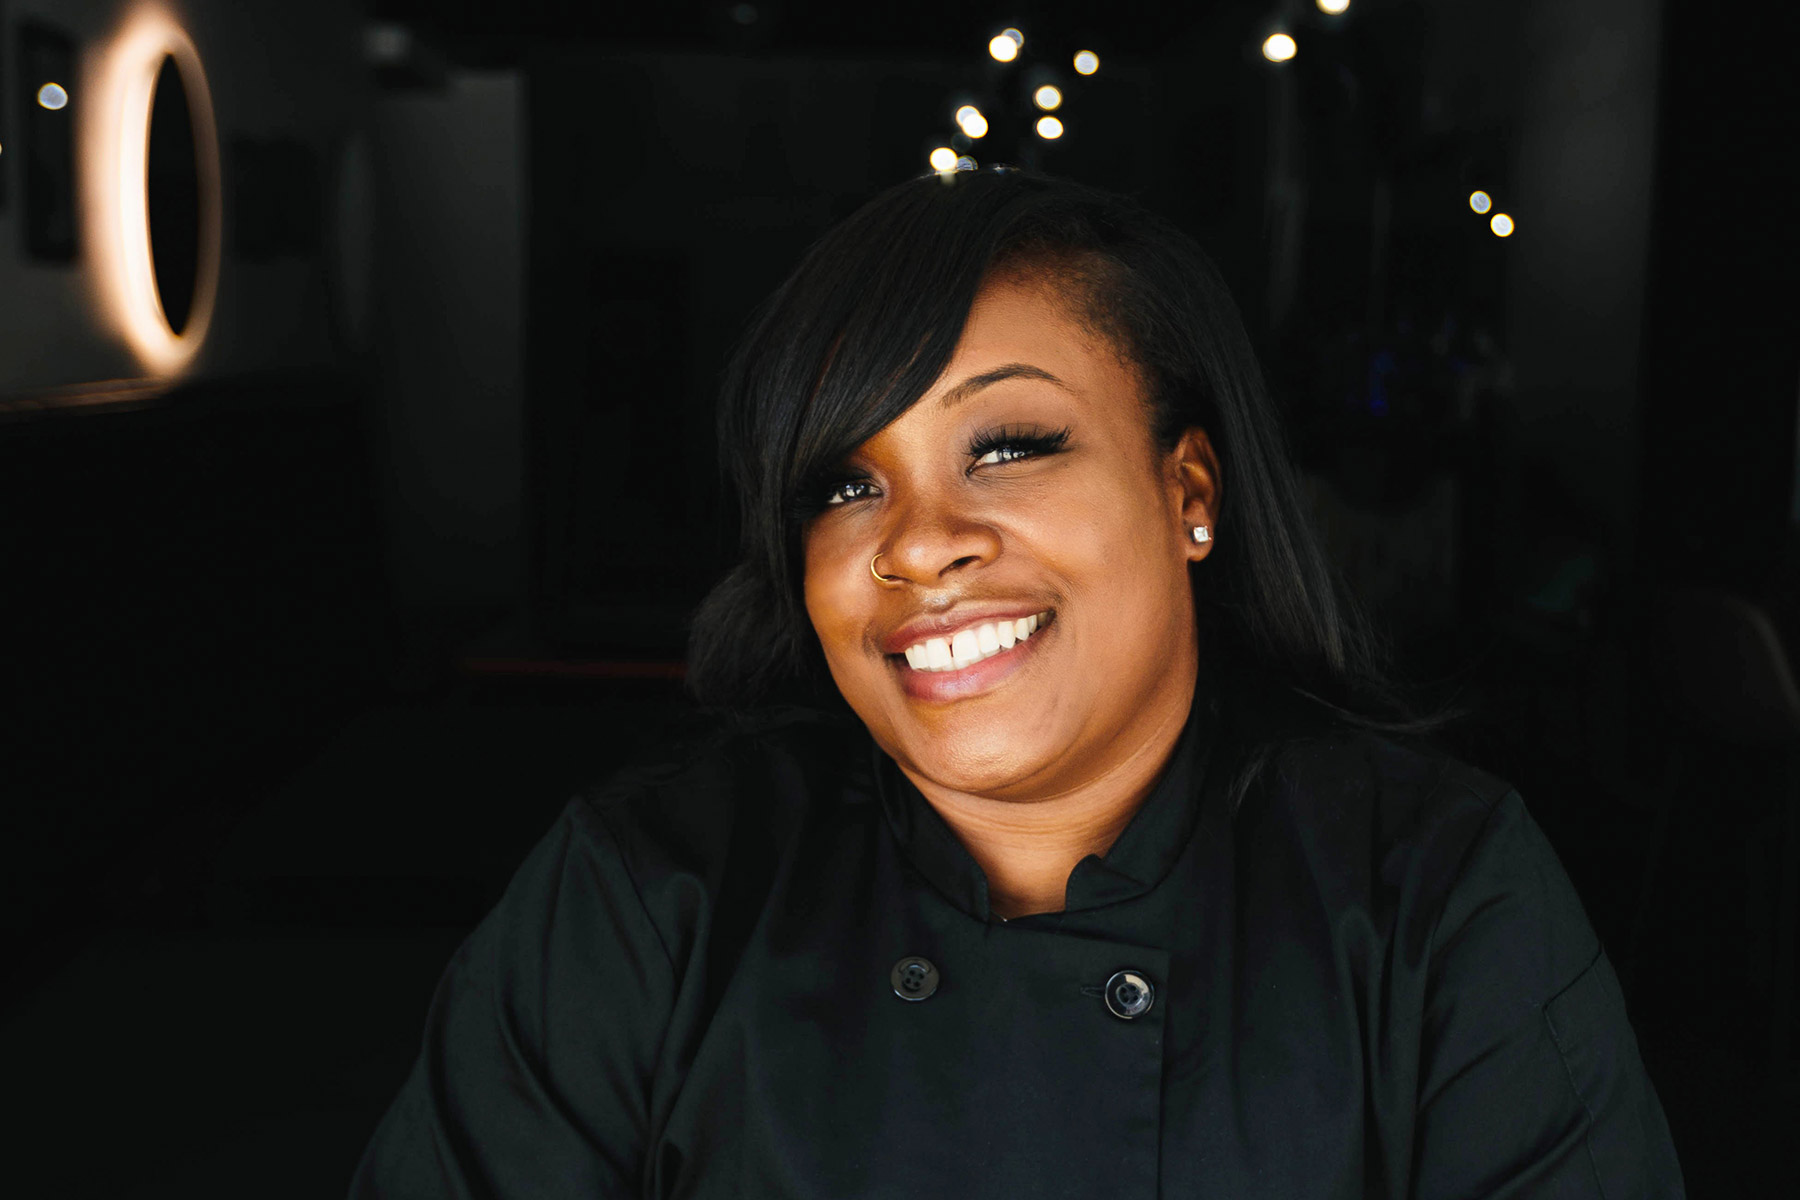 Chef Tasia White of TaejaVu's on Main, wearing a black chef jacket against a dark restaurant backdrop